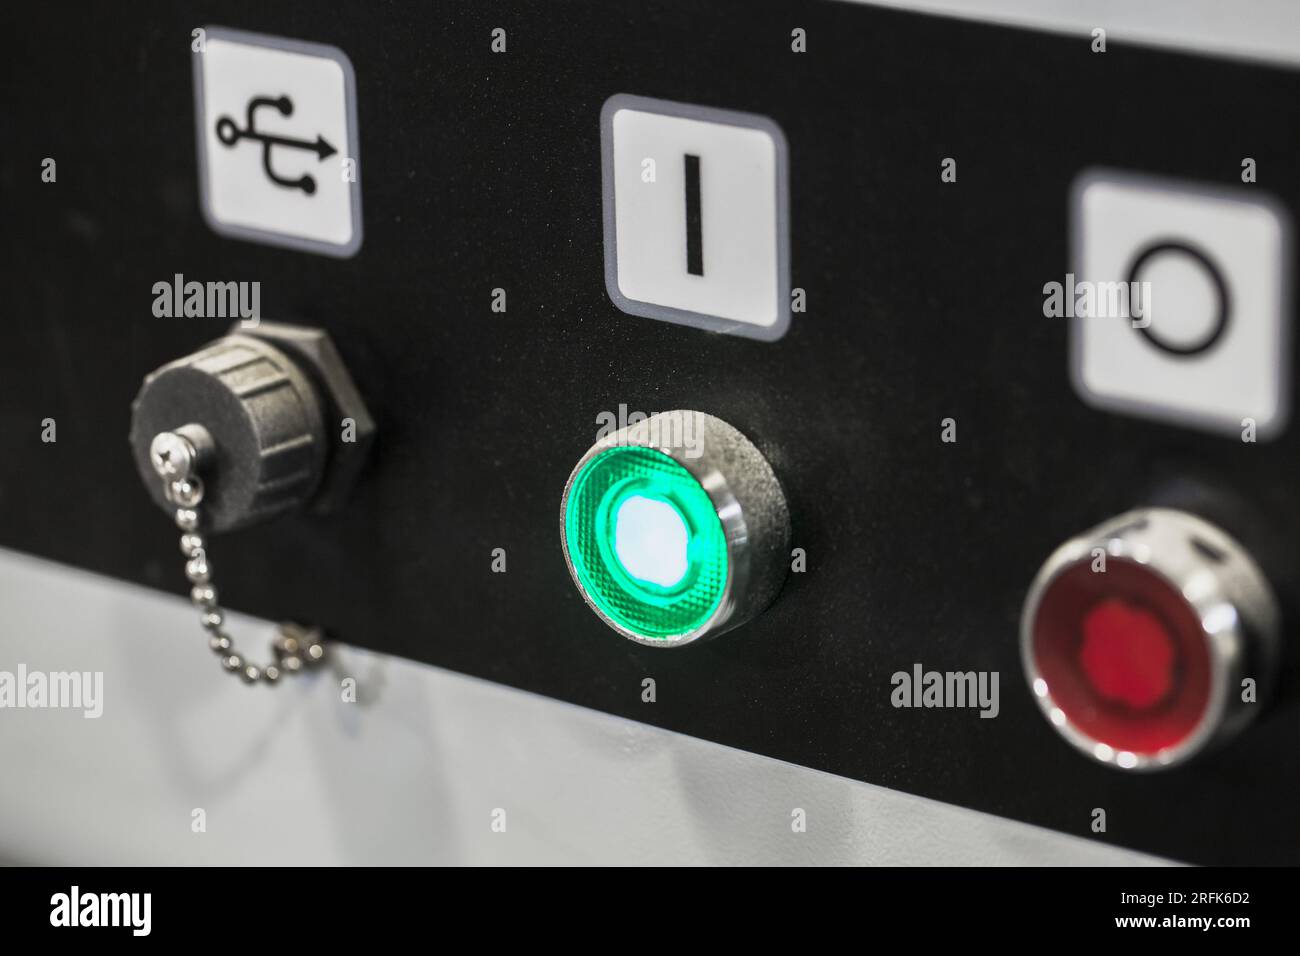 Industrial control panel with start stop buttons and closed USB socket, close-up photo with selective soft focus Stock Photo